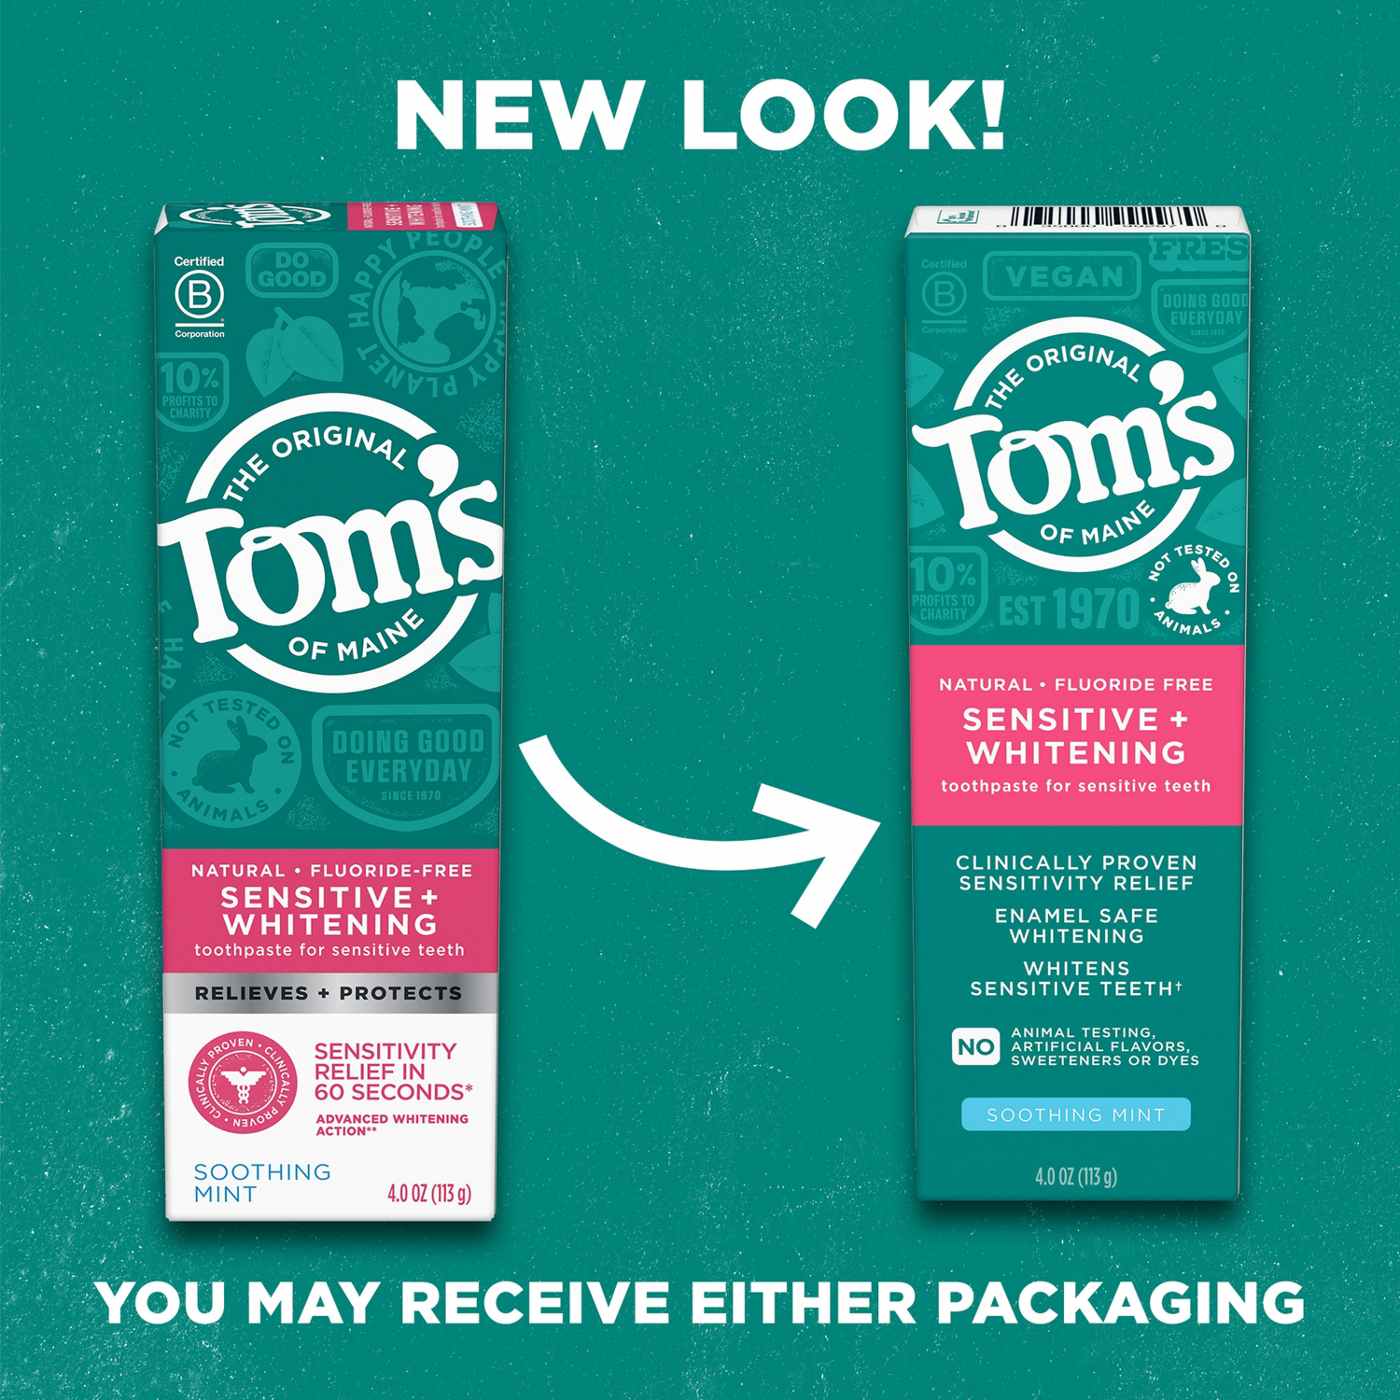 Tom's of Maine Sensitive + Whitening Toothpaste - Soothing Mint; image 7 of 9